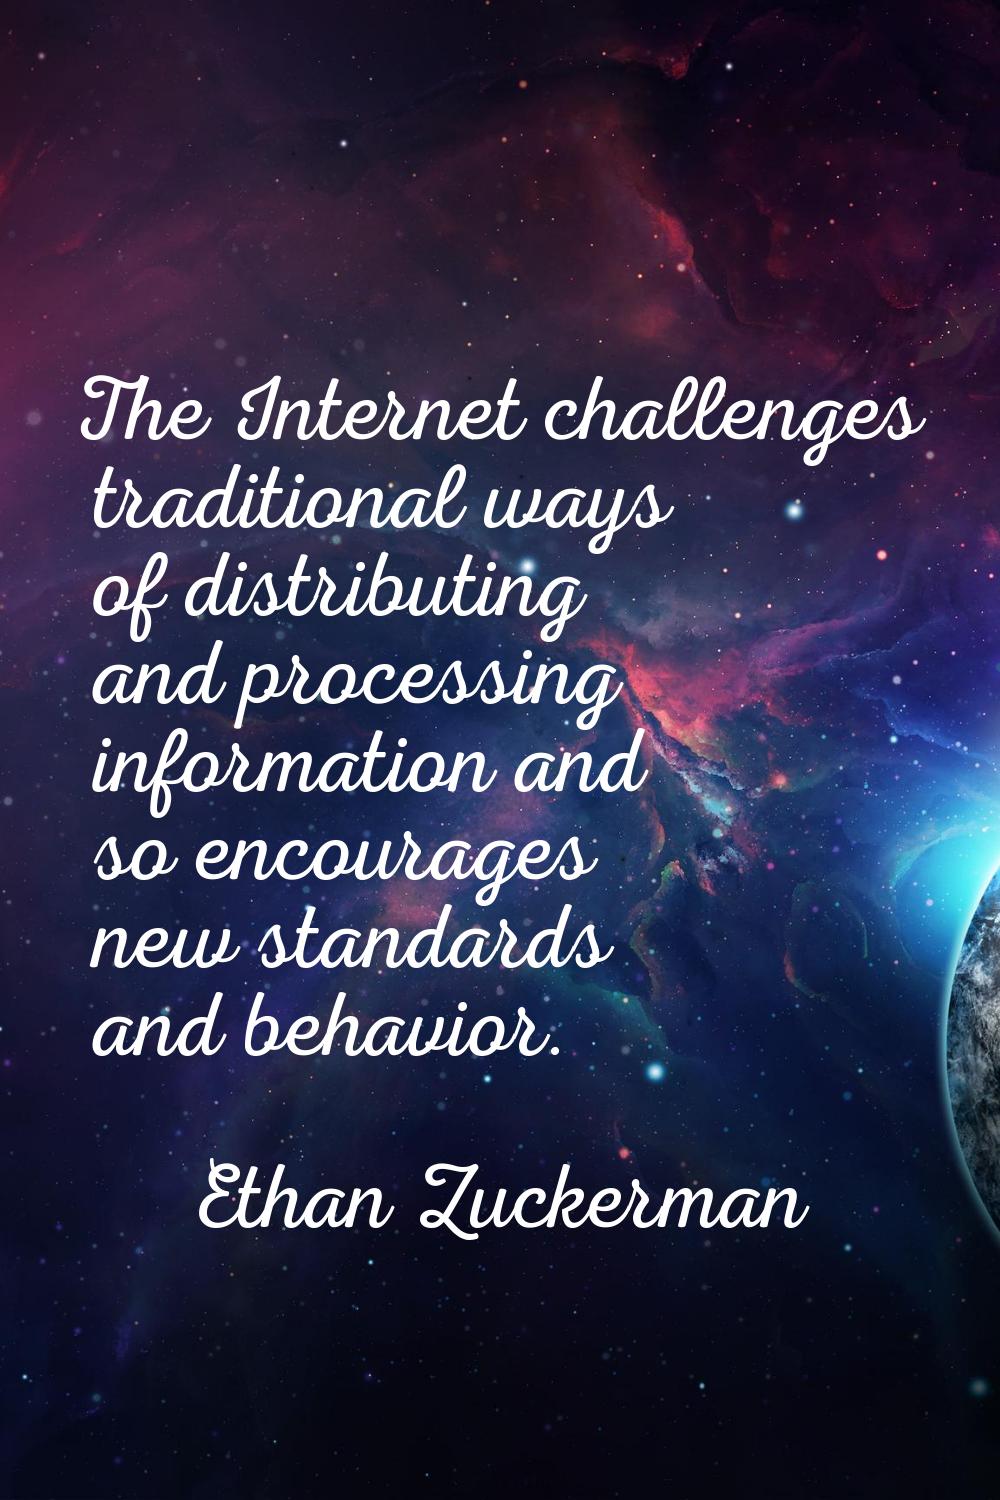 The Internet challenges traditional ways of distributing and processing information and so encourag